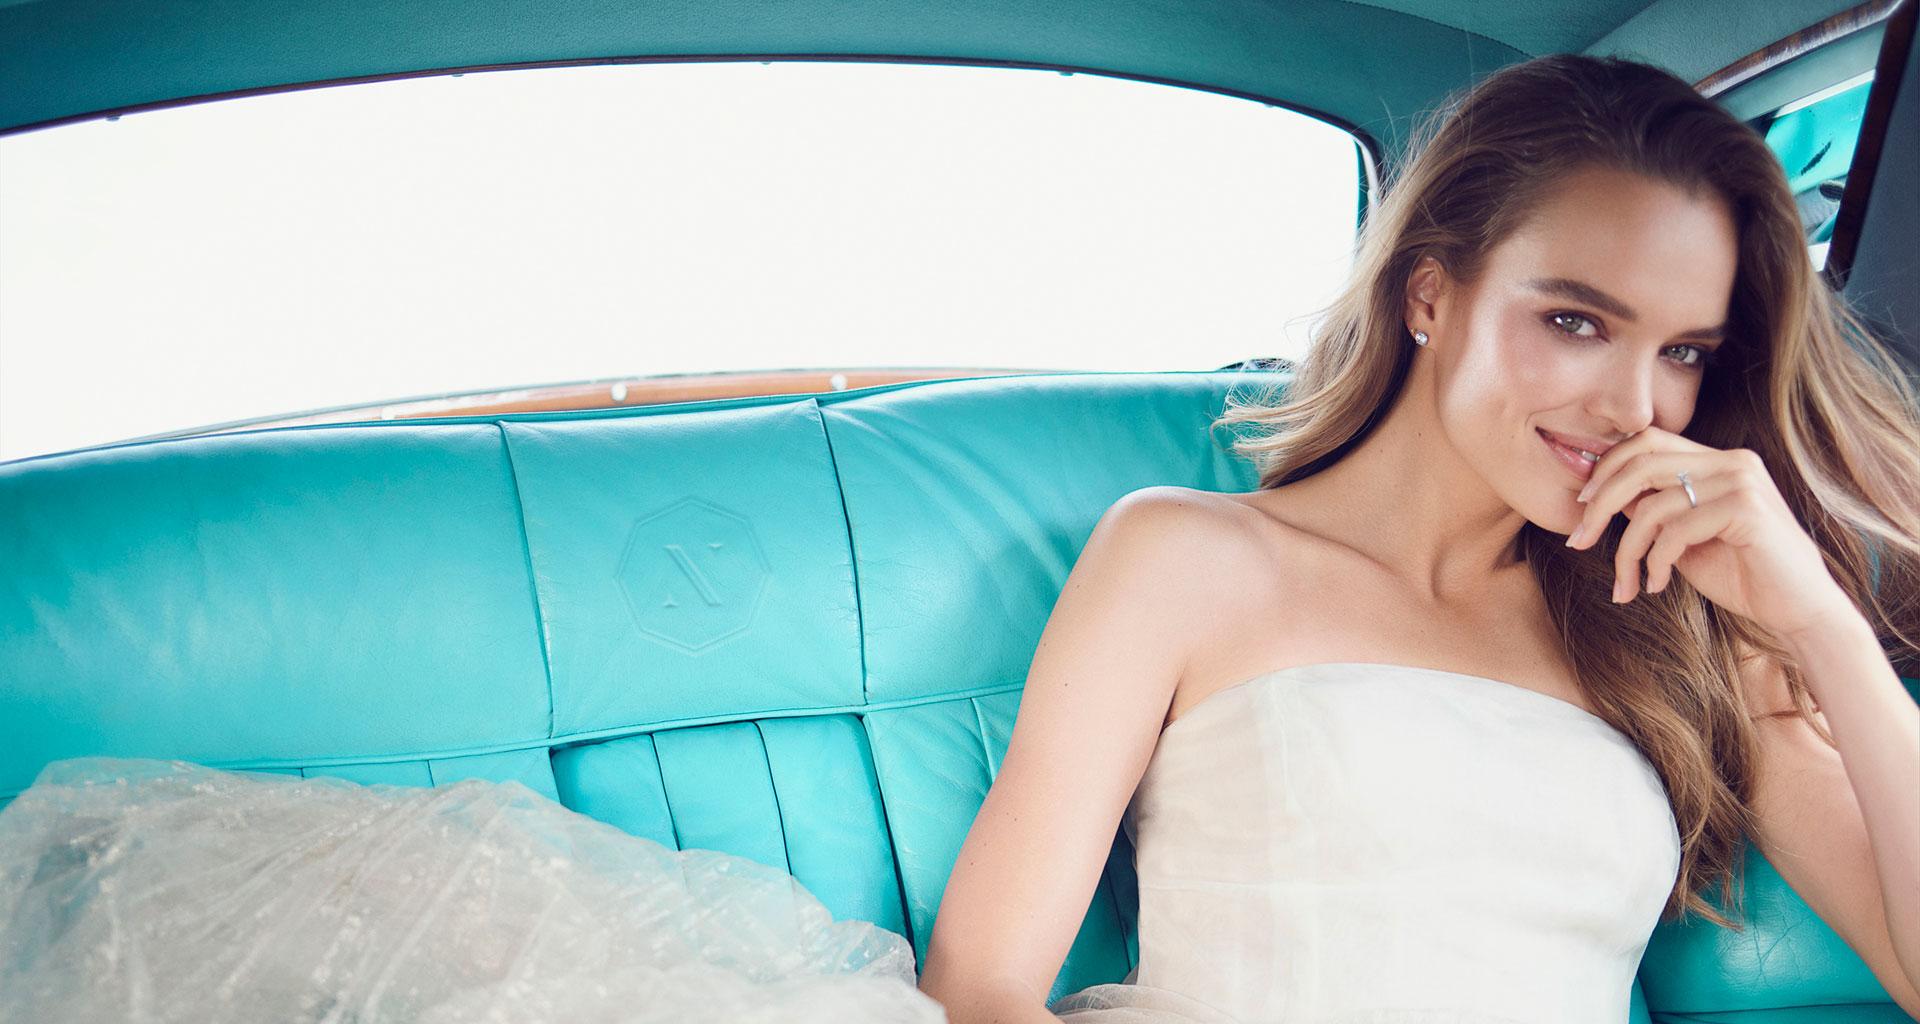 A woman smiling in a white dress in the back seat of car.